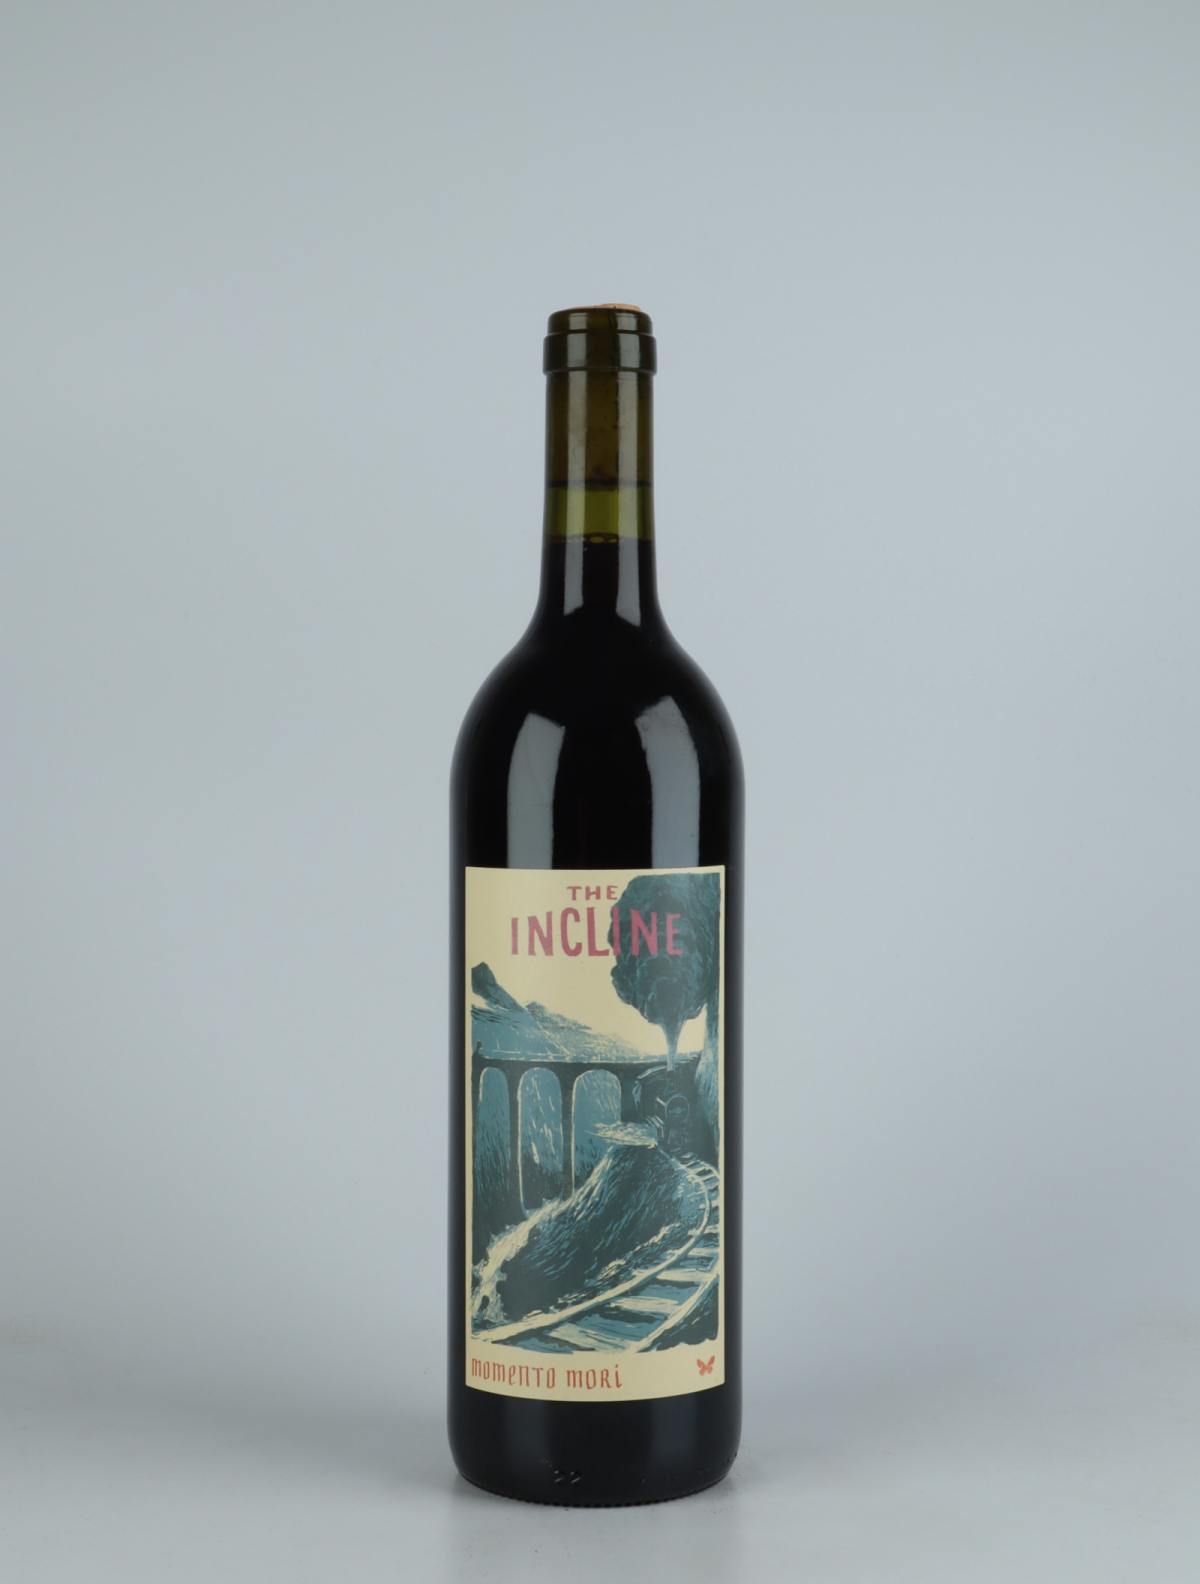 A bottle 2020 The Incline Red wine from Momento Mori, Victoria in 